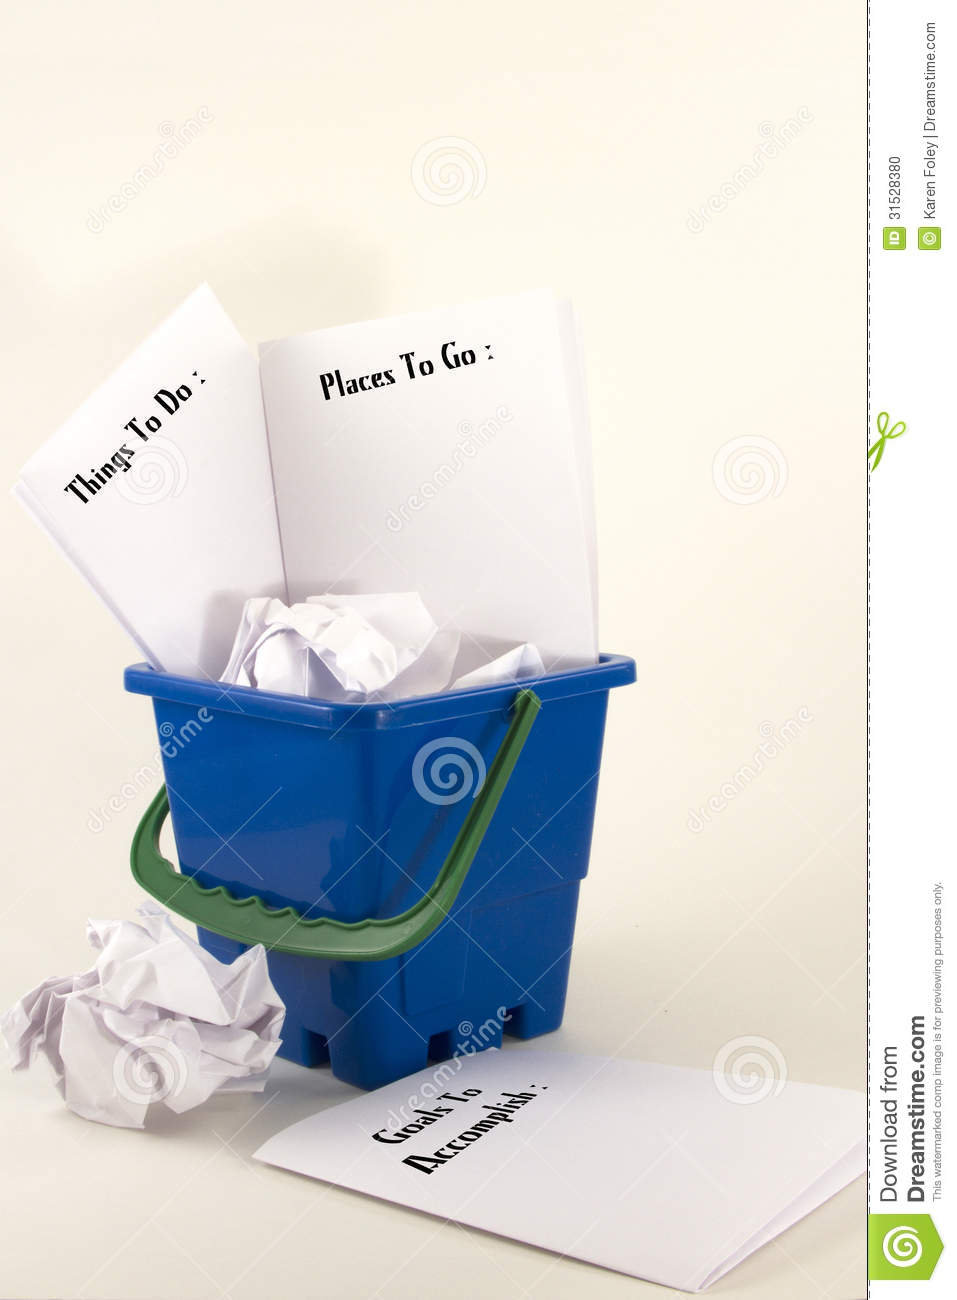 Bucket Filled With Wadded Up Paper And Sheets Listing Things To Do    